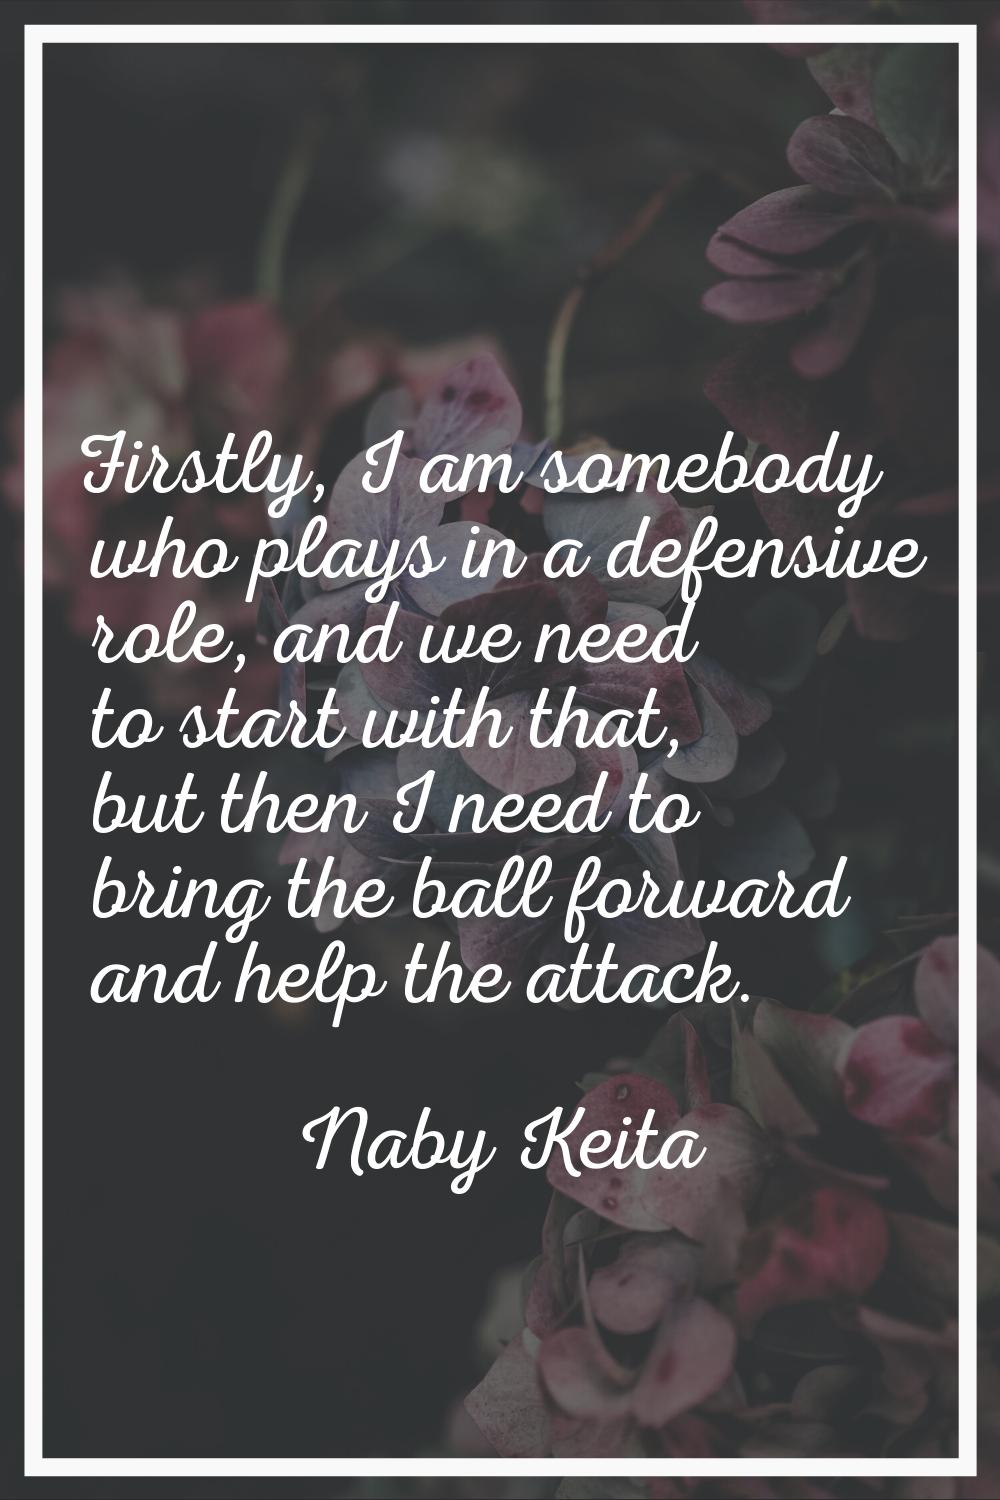 Firstly, I am somebody who plays in a defensive role, and we need to start with that, but then I ne